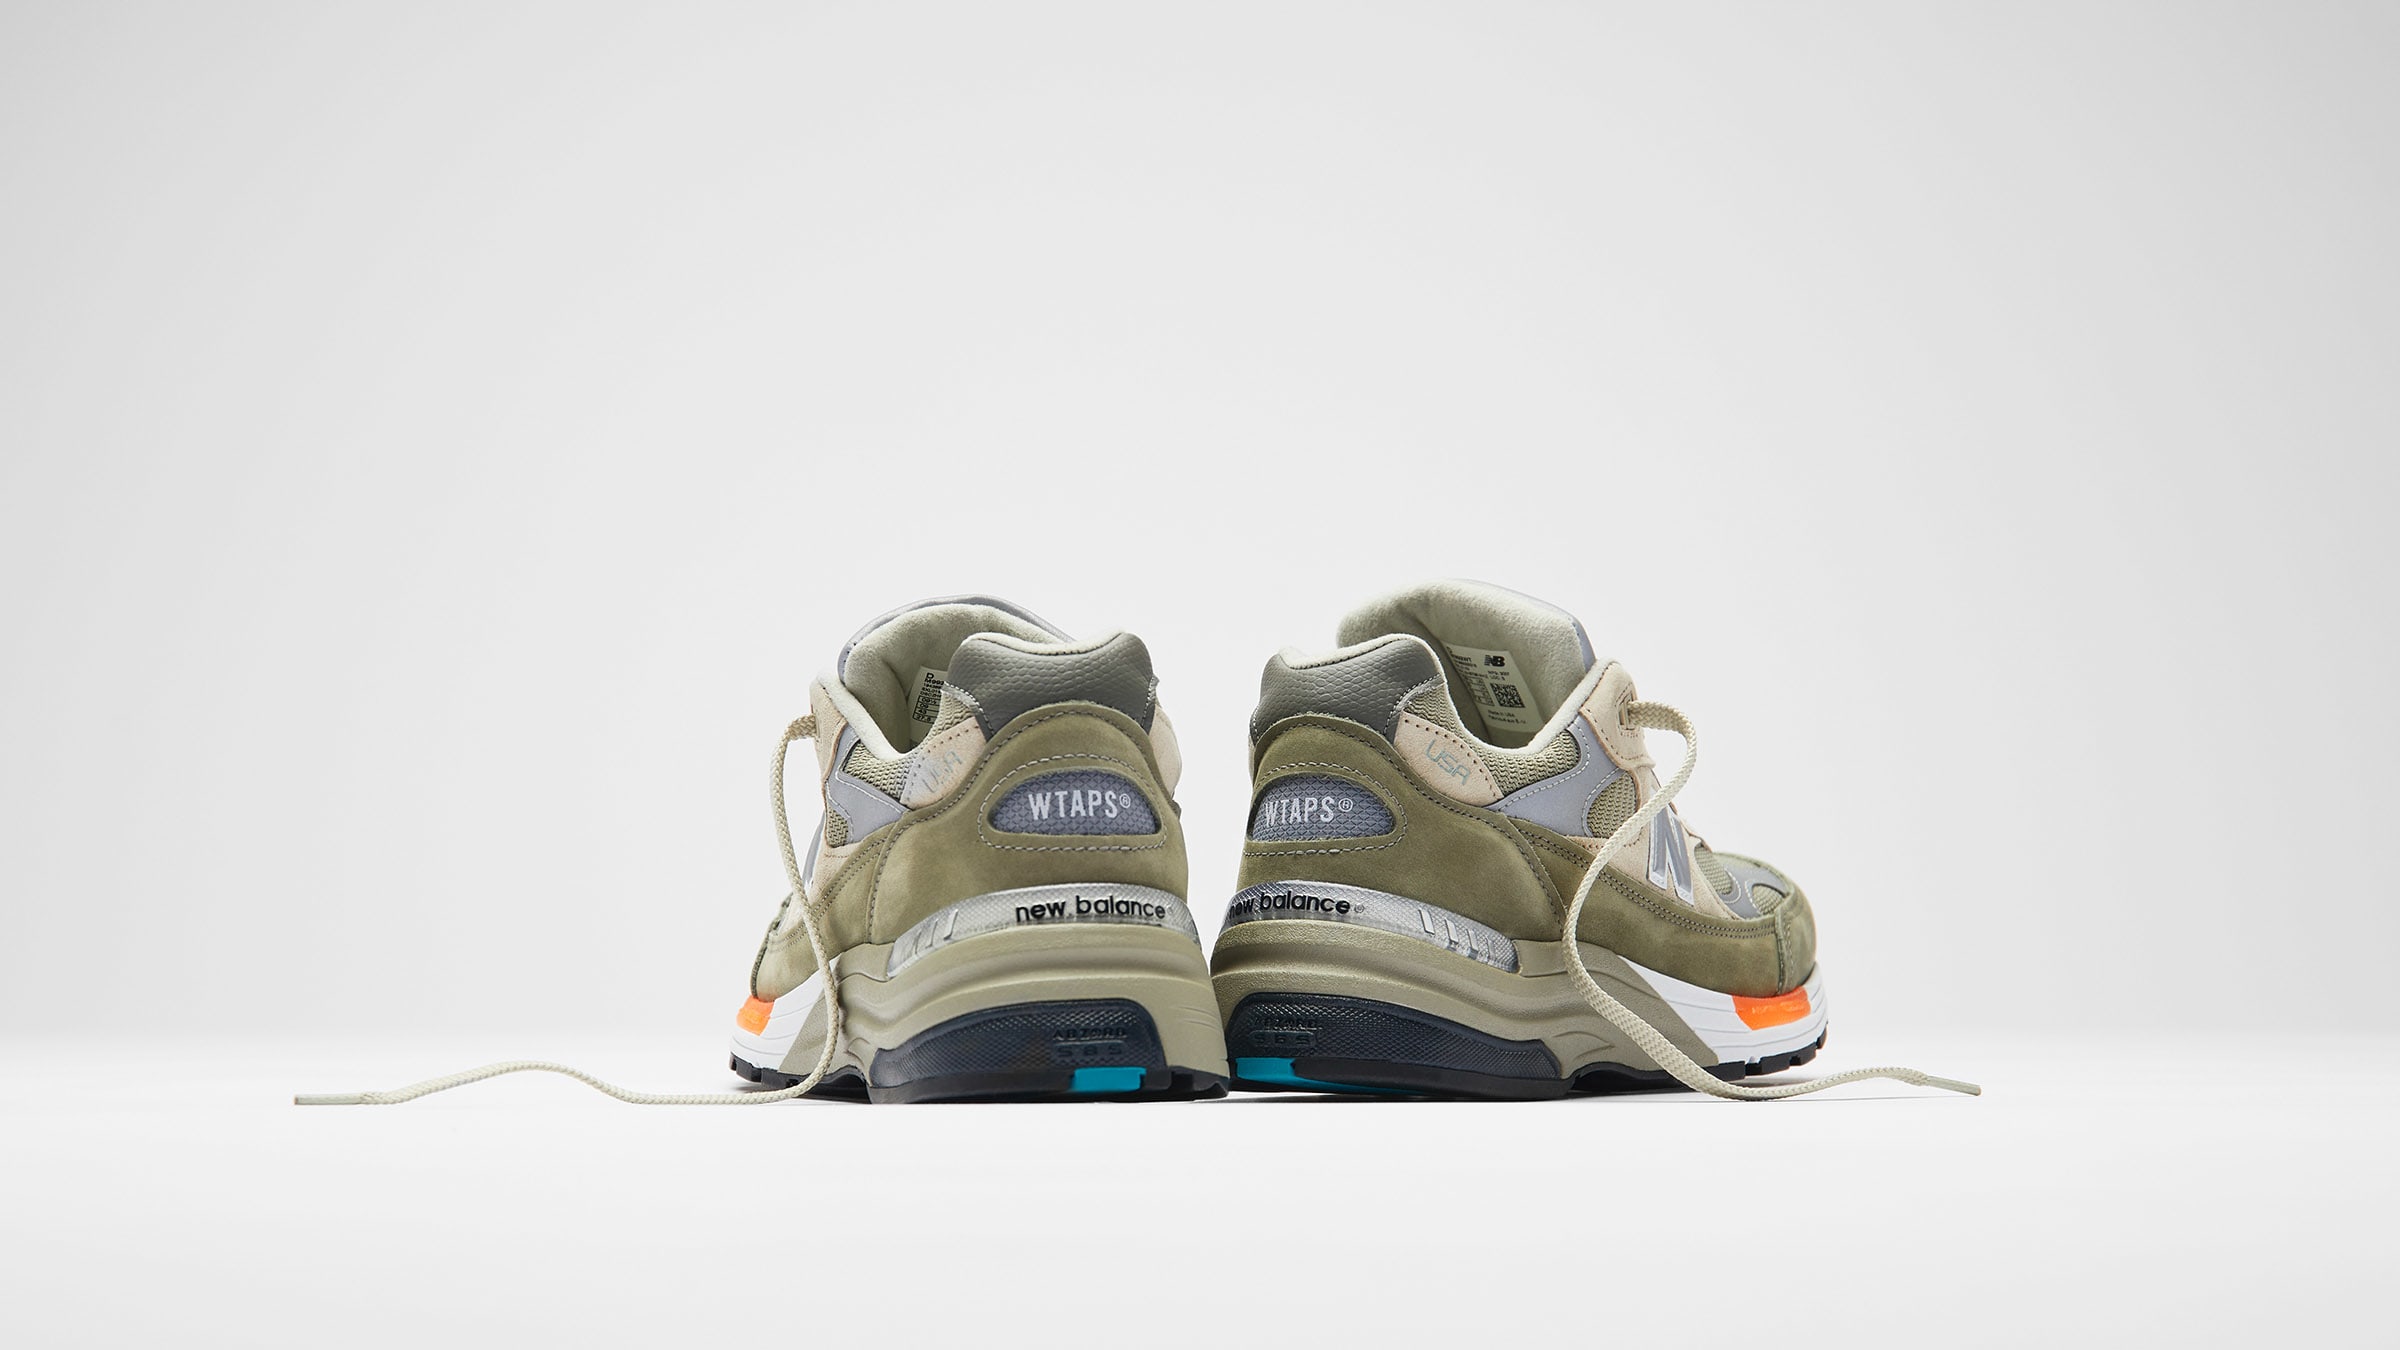 New Balance x WTAPS M992WT - Made in USA (Olive Drab) | END. Launches